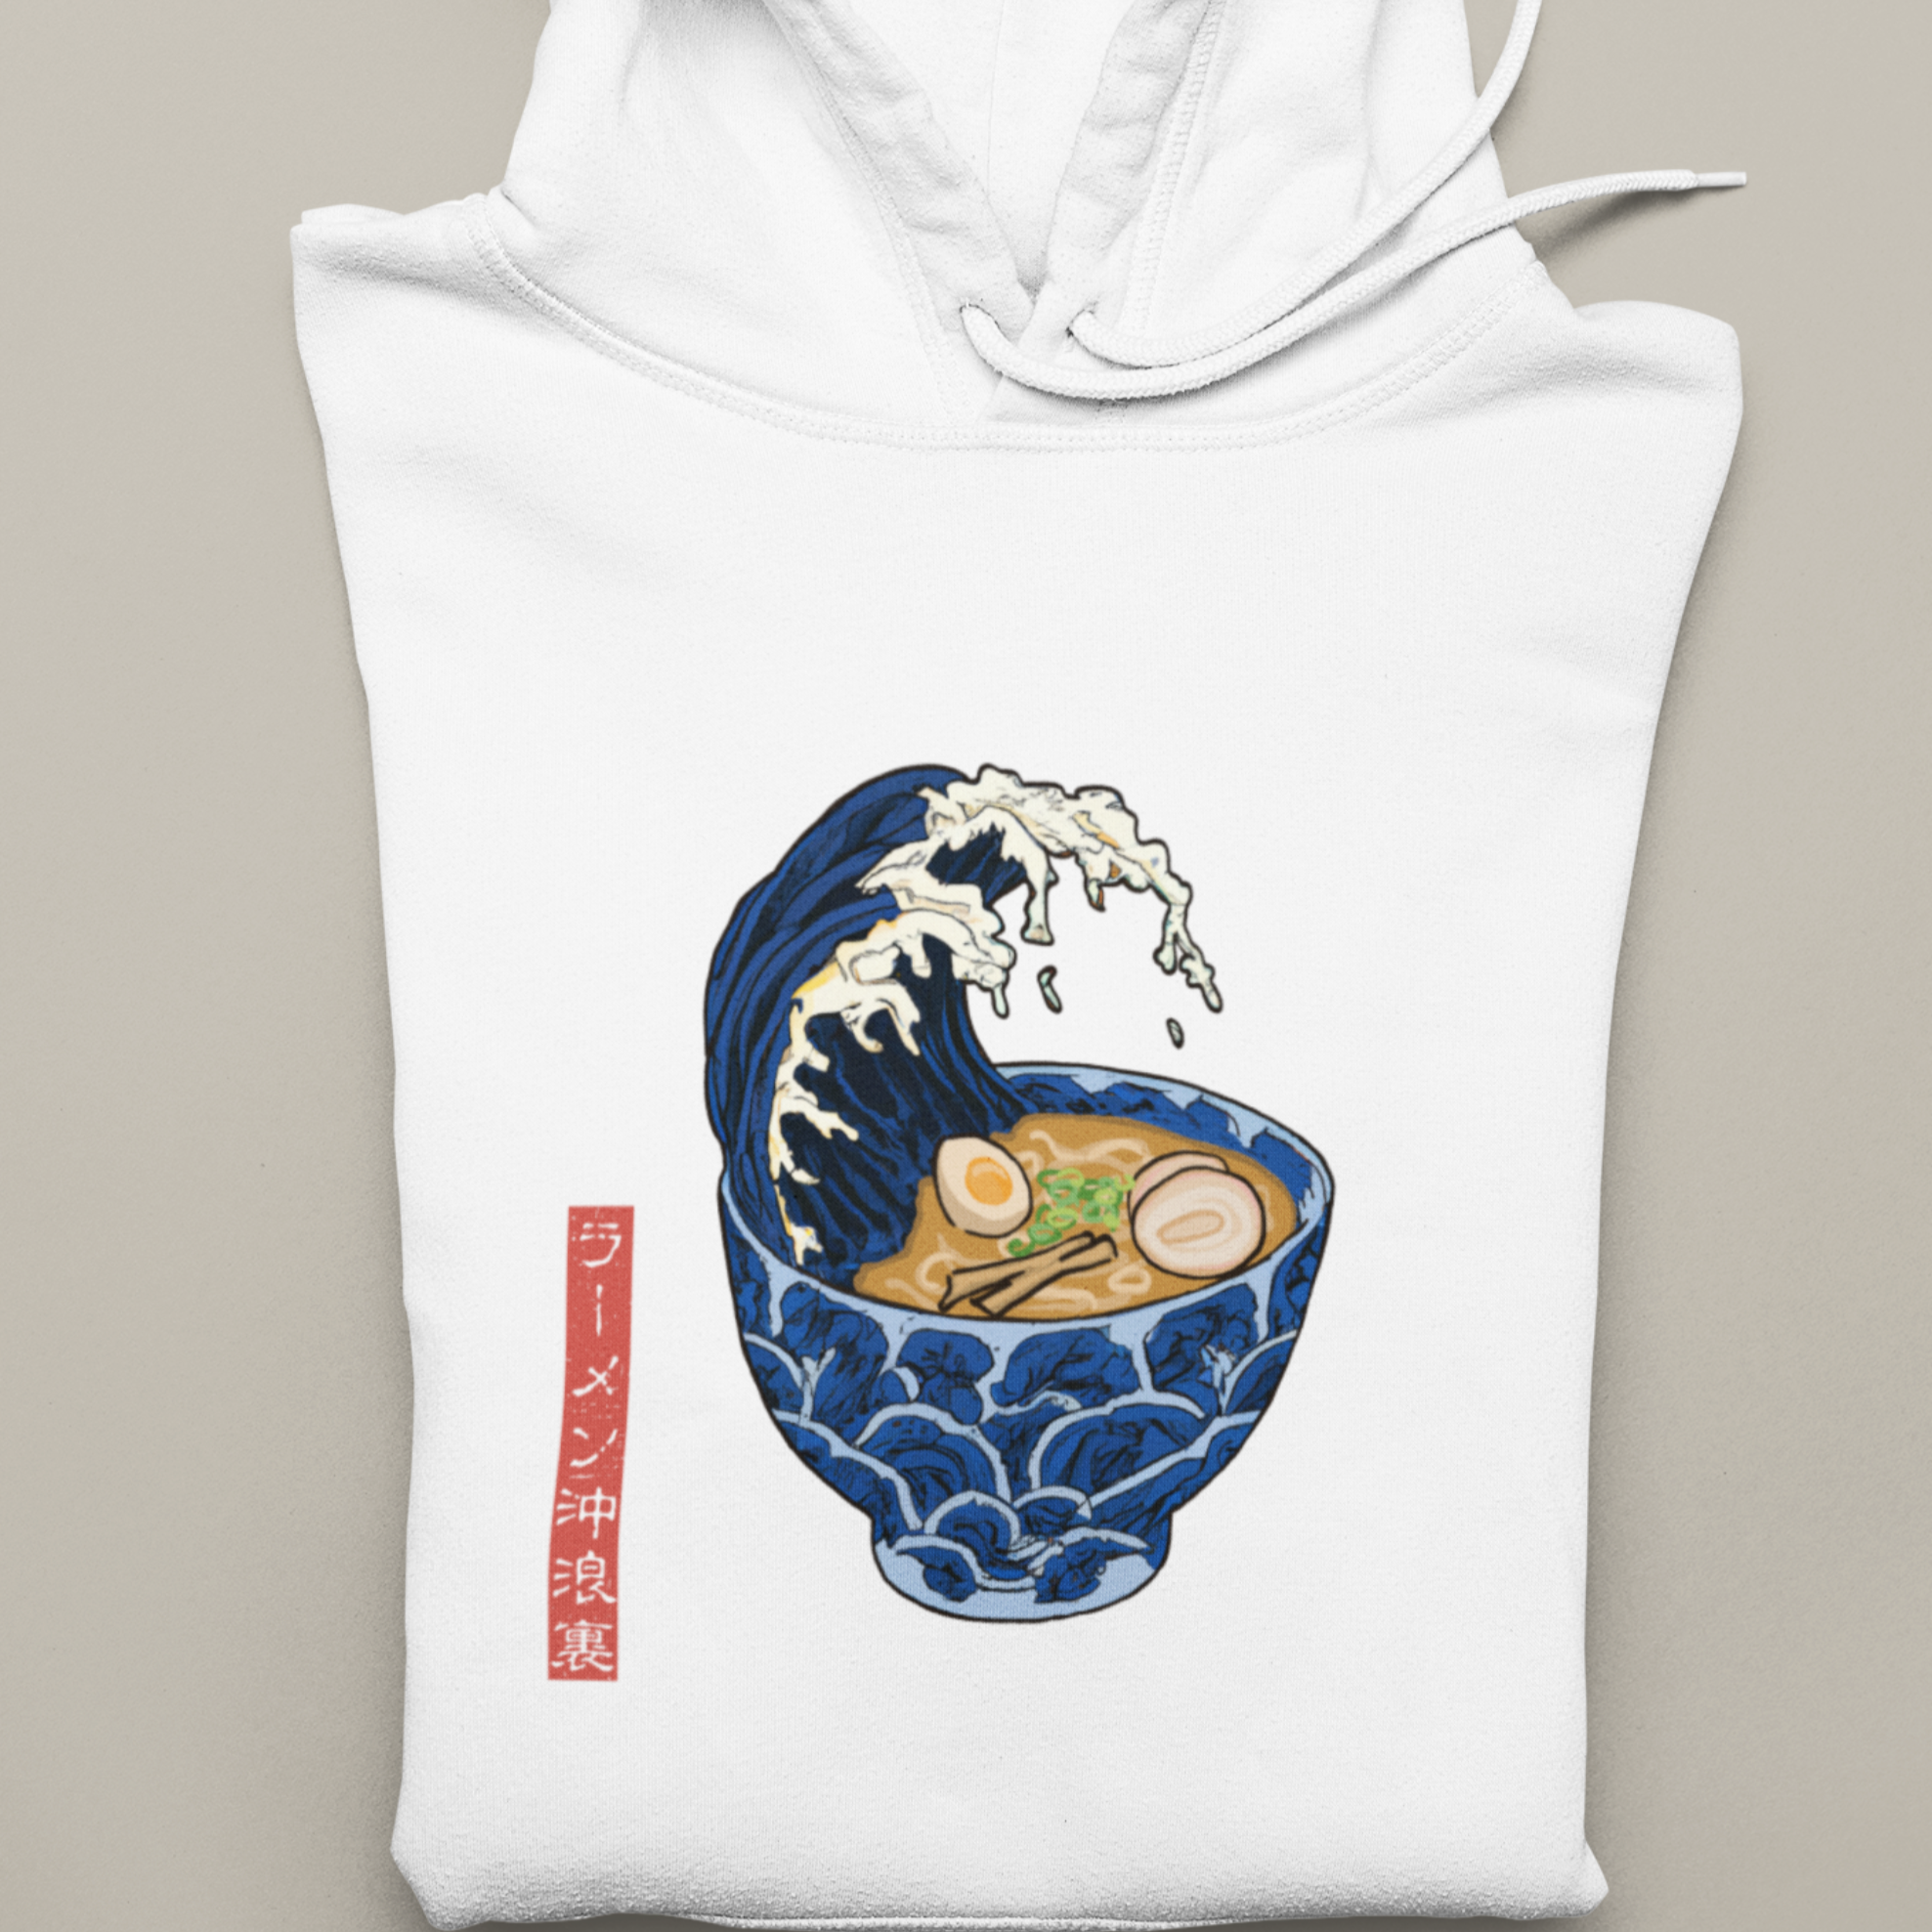 Ramen Hoodie: Hokusai Wave Edition - Foodie and Asian Food Hoodie with Stunning Ramen Art and Japanese-Inspired Design